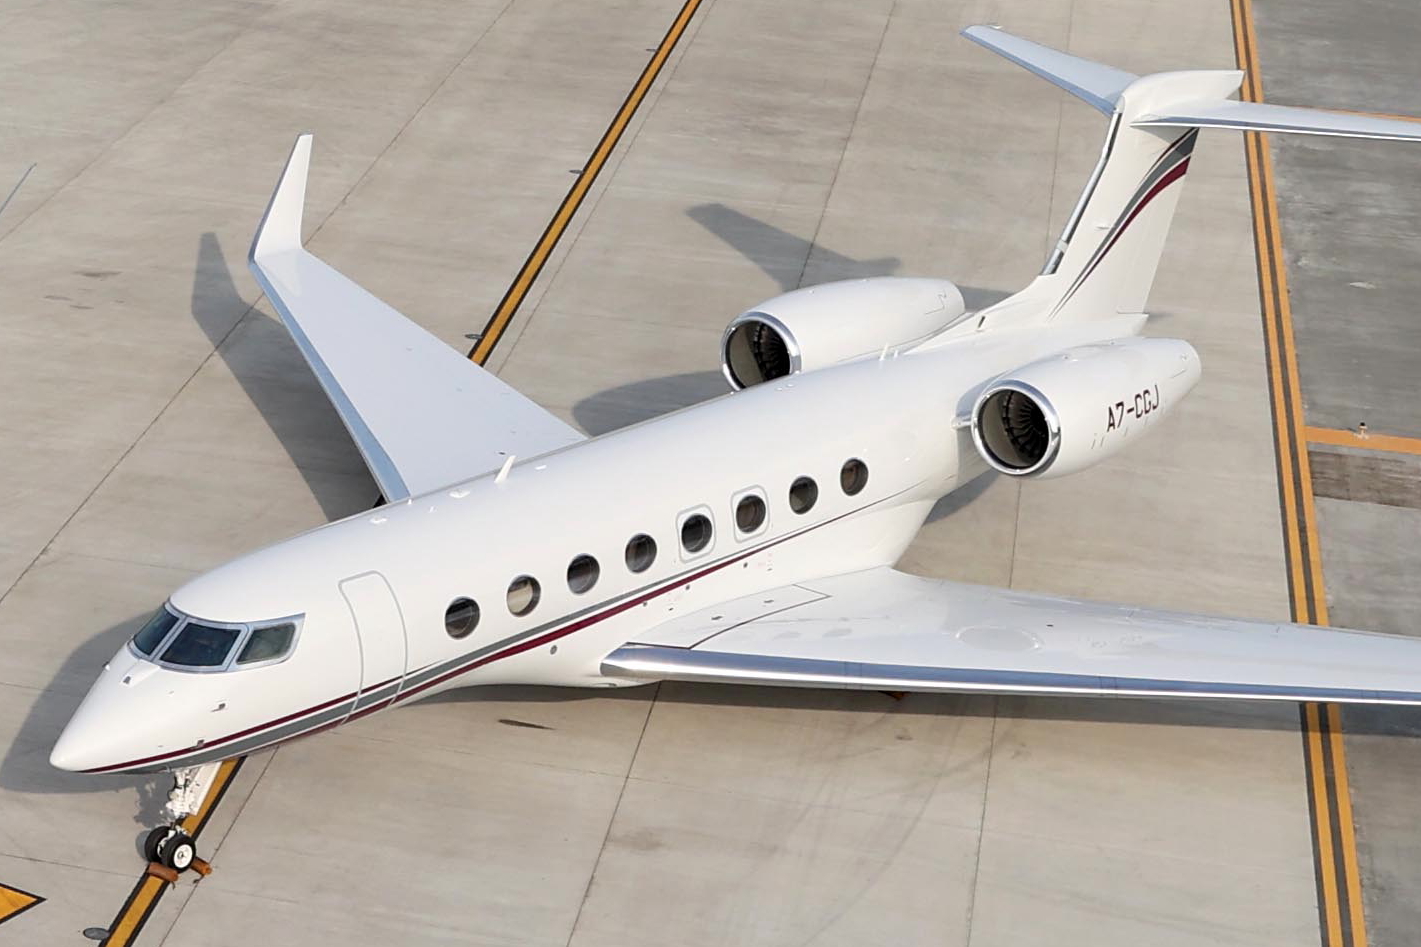 Qatar Executive’s G650ER aircraft can operate non-stop from Doha to Seoul in just over eight hours. Click to enlarge.